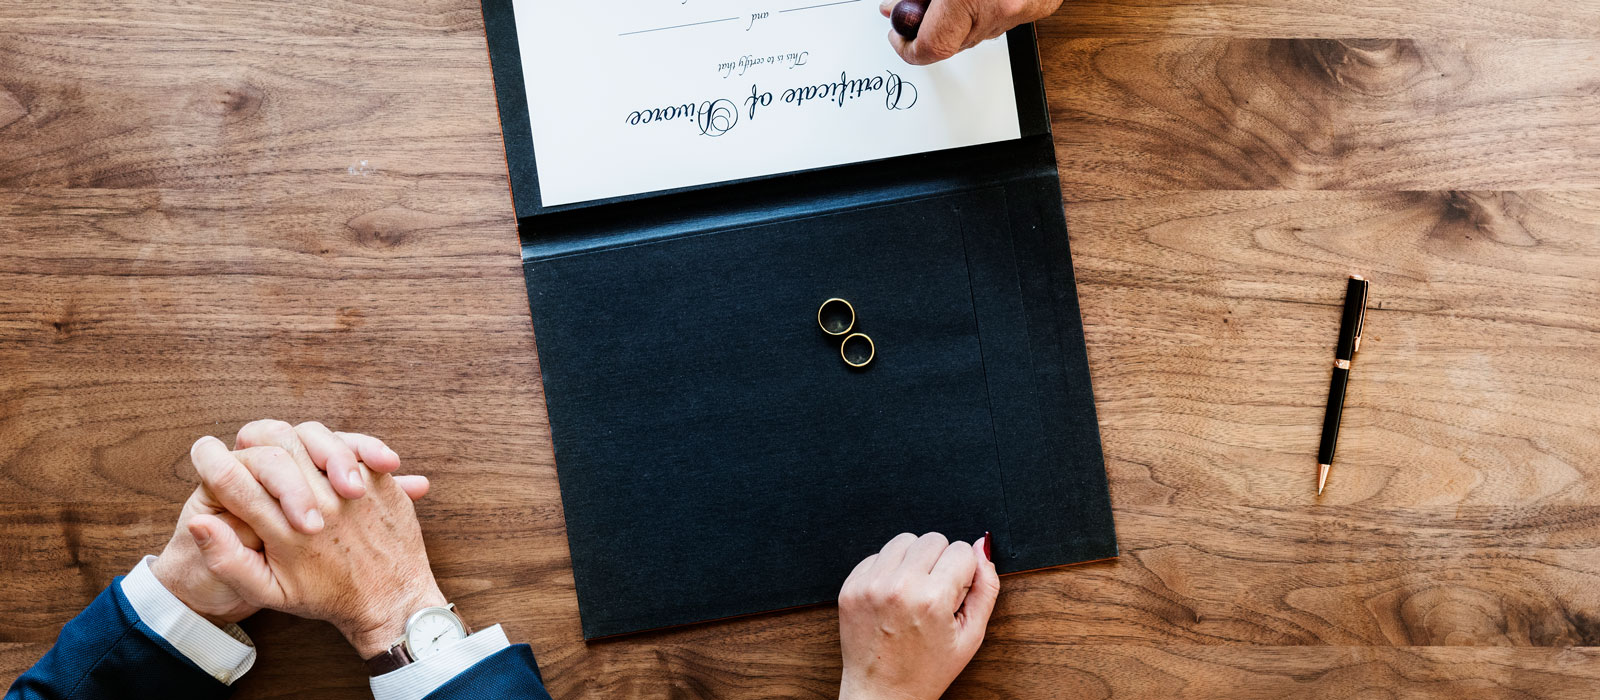 Wedding rings and documents of a divorcing couple.